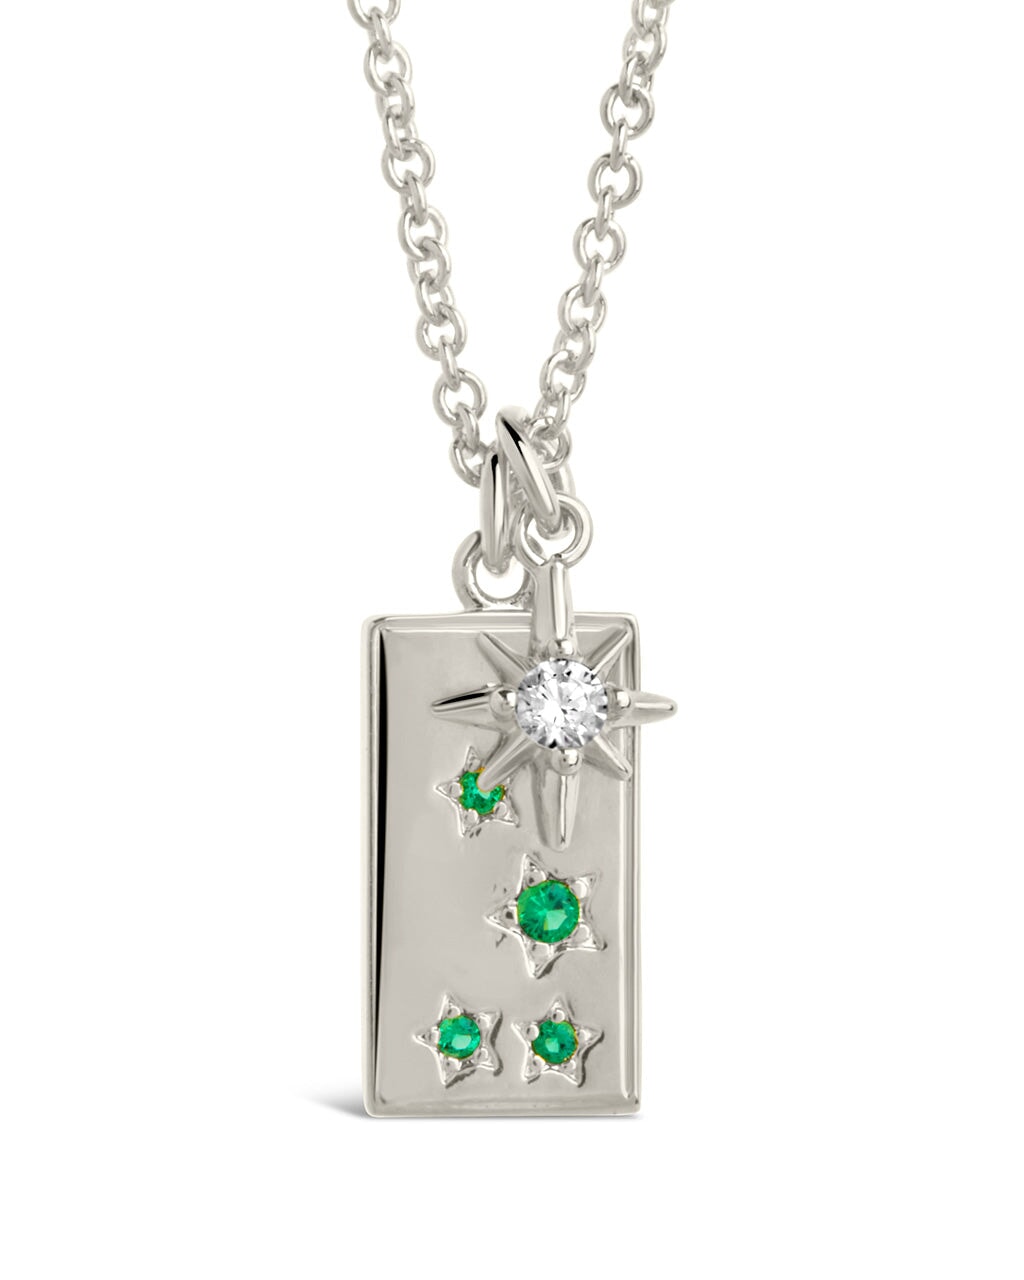 Burst & Tag Charm Necklace Necklace Sterling Forever Silver 